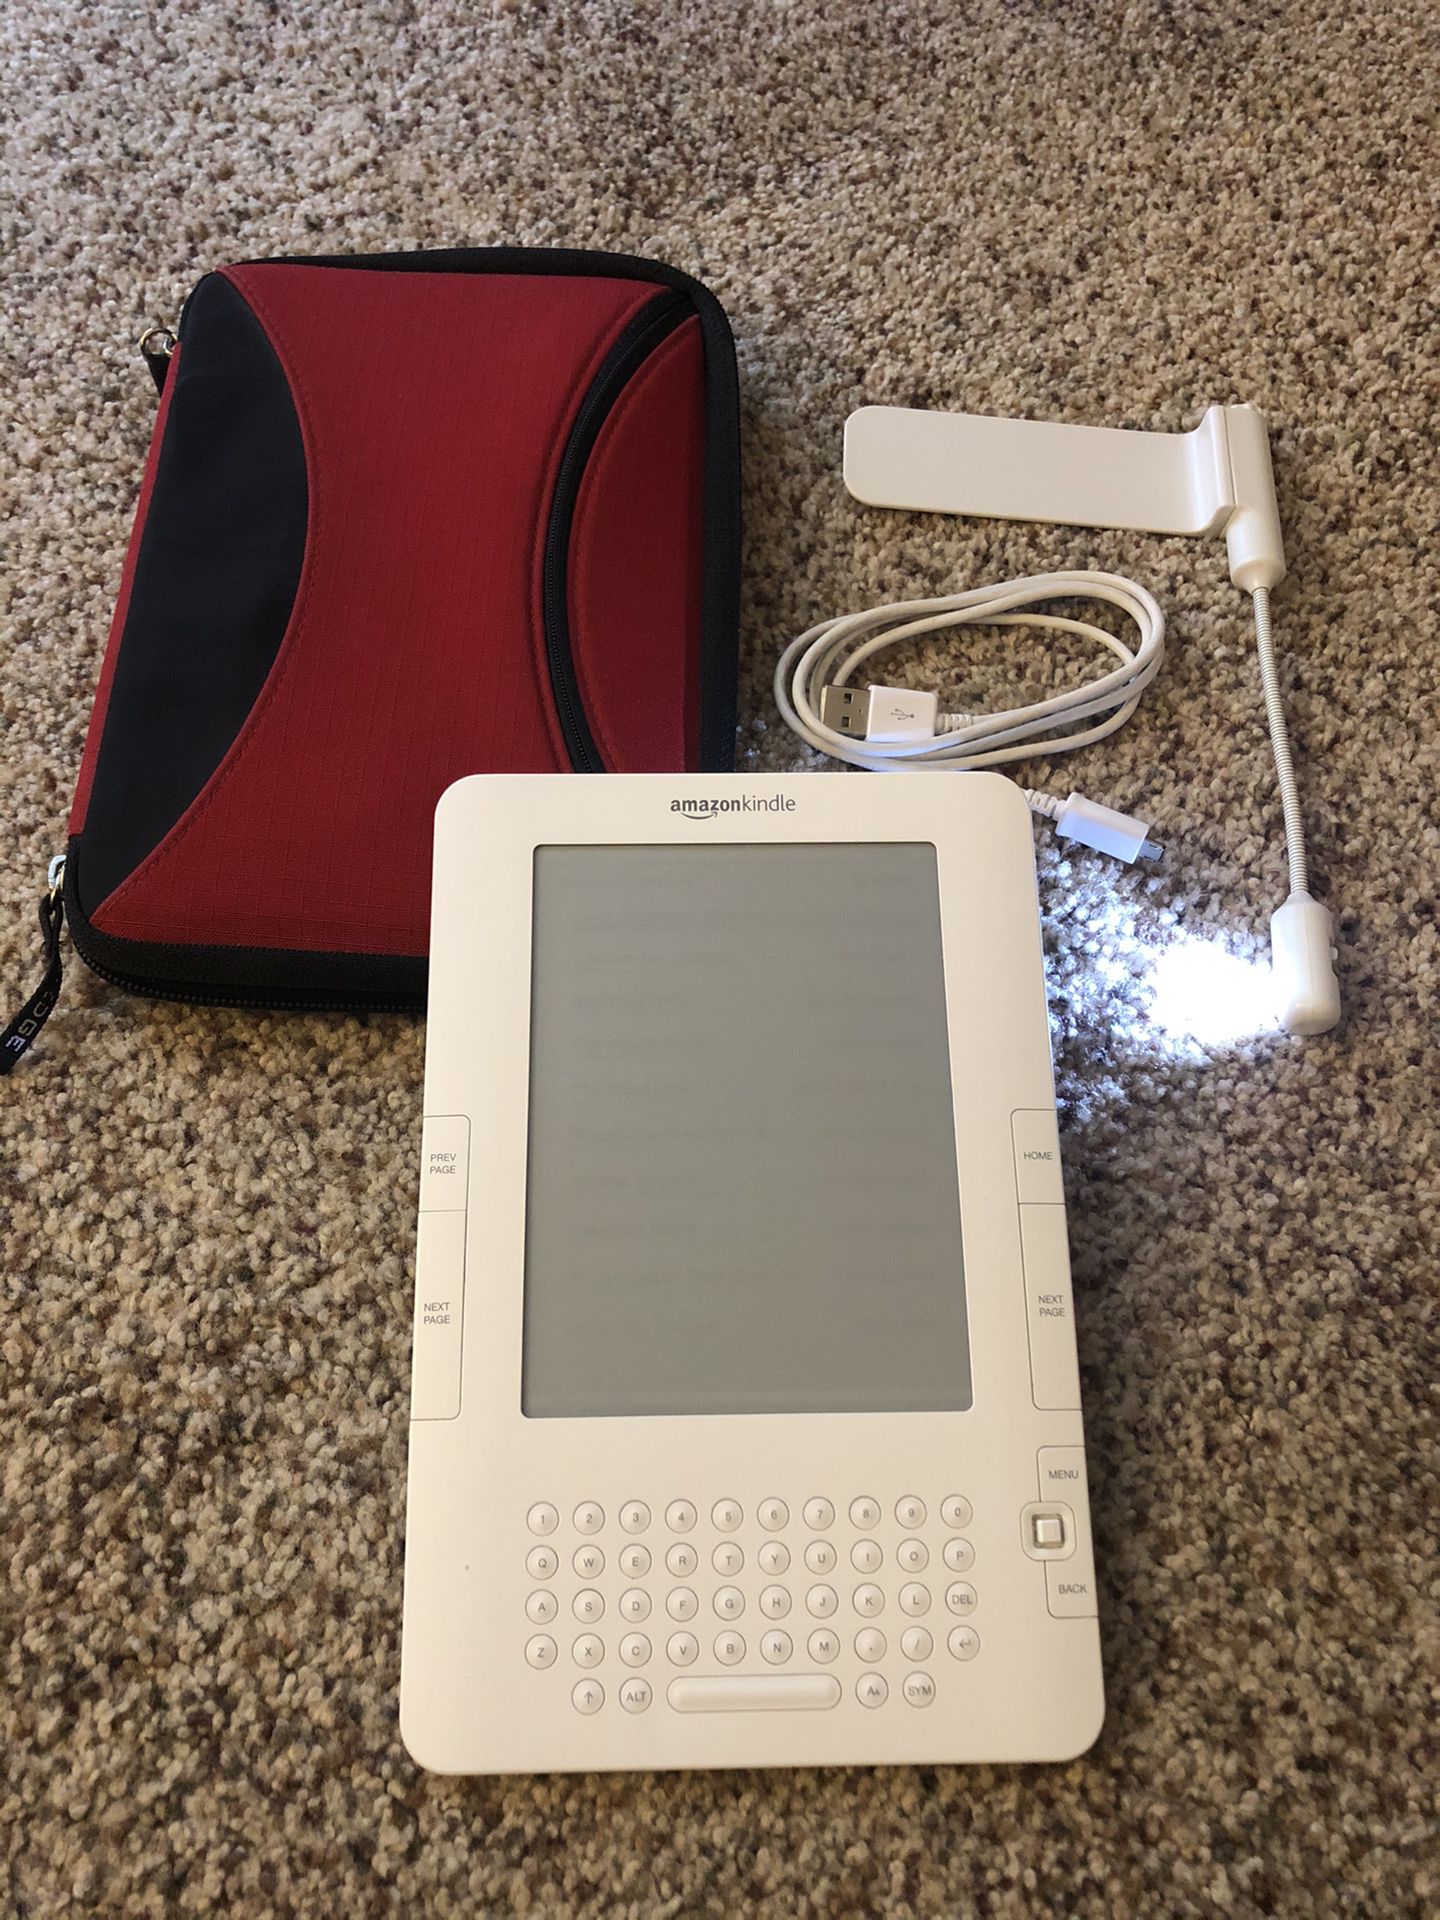 Kindle 2nd Generation - 3G WiFi with case, charger and light